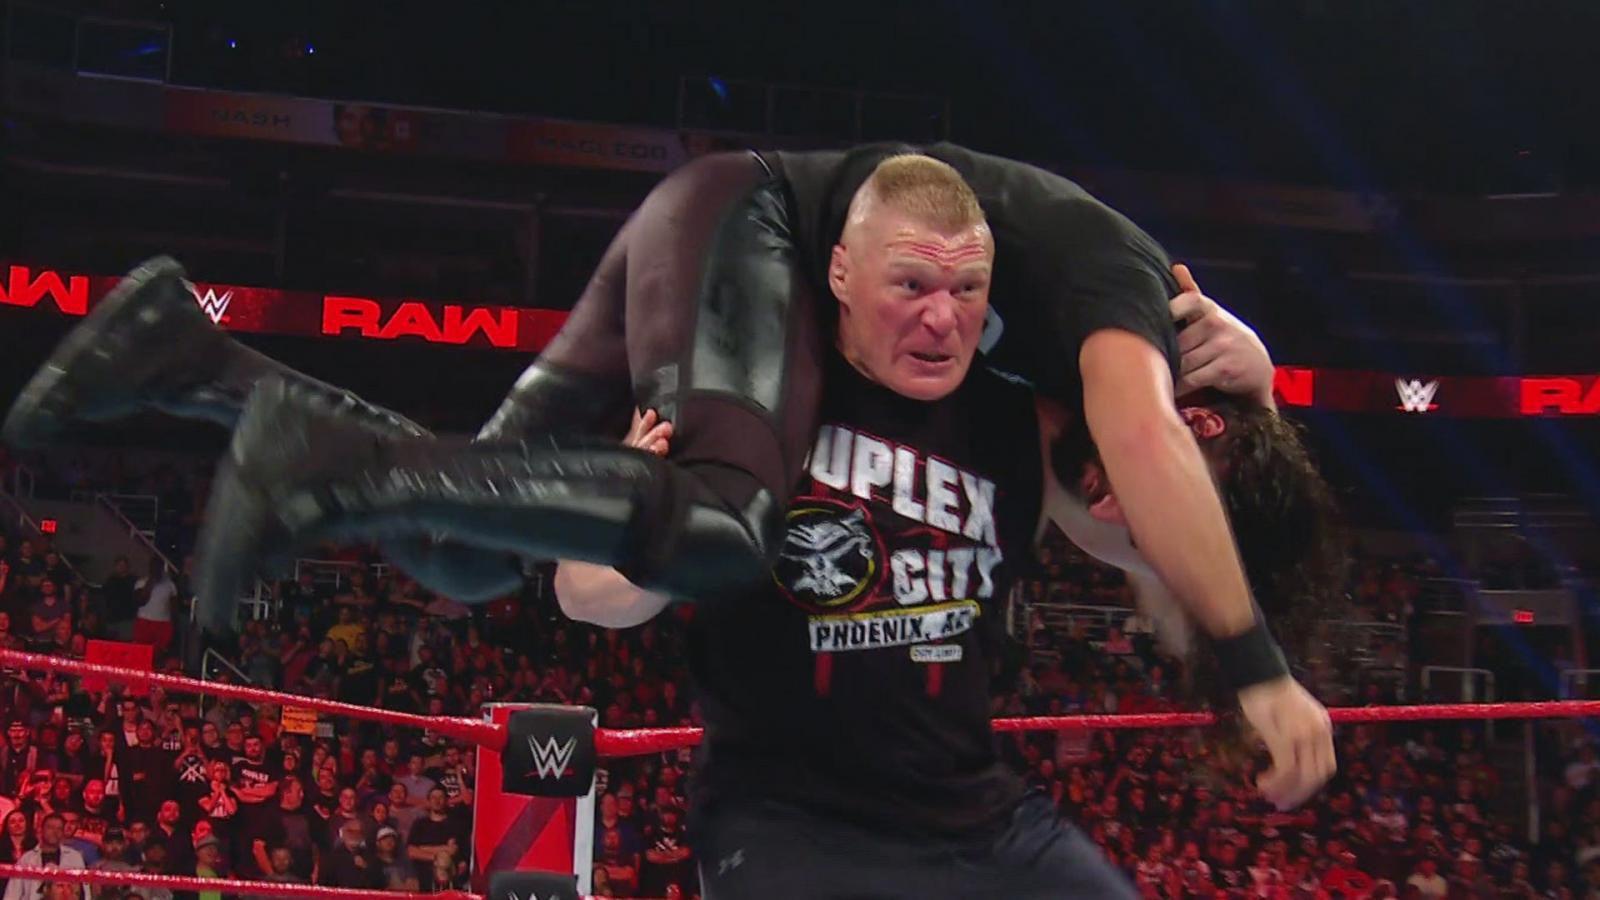 WWE Raw results Lesnar vs Seth Rollins and Ronda Rousey vs